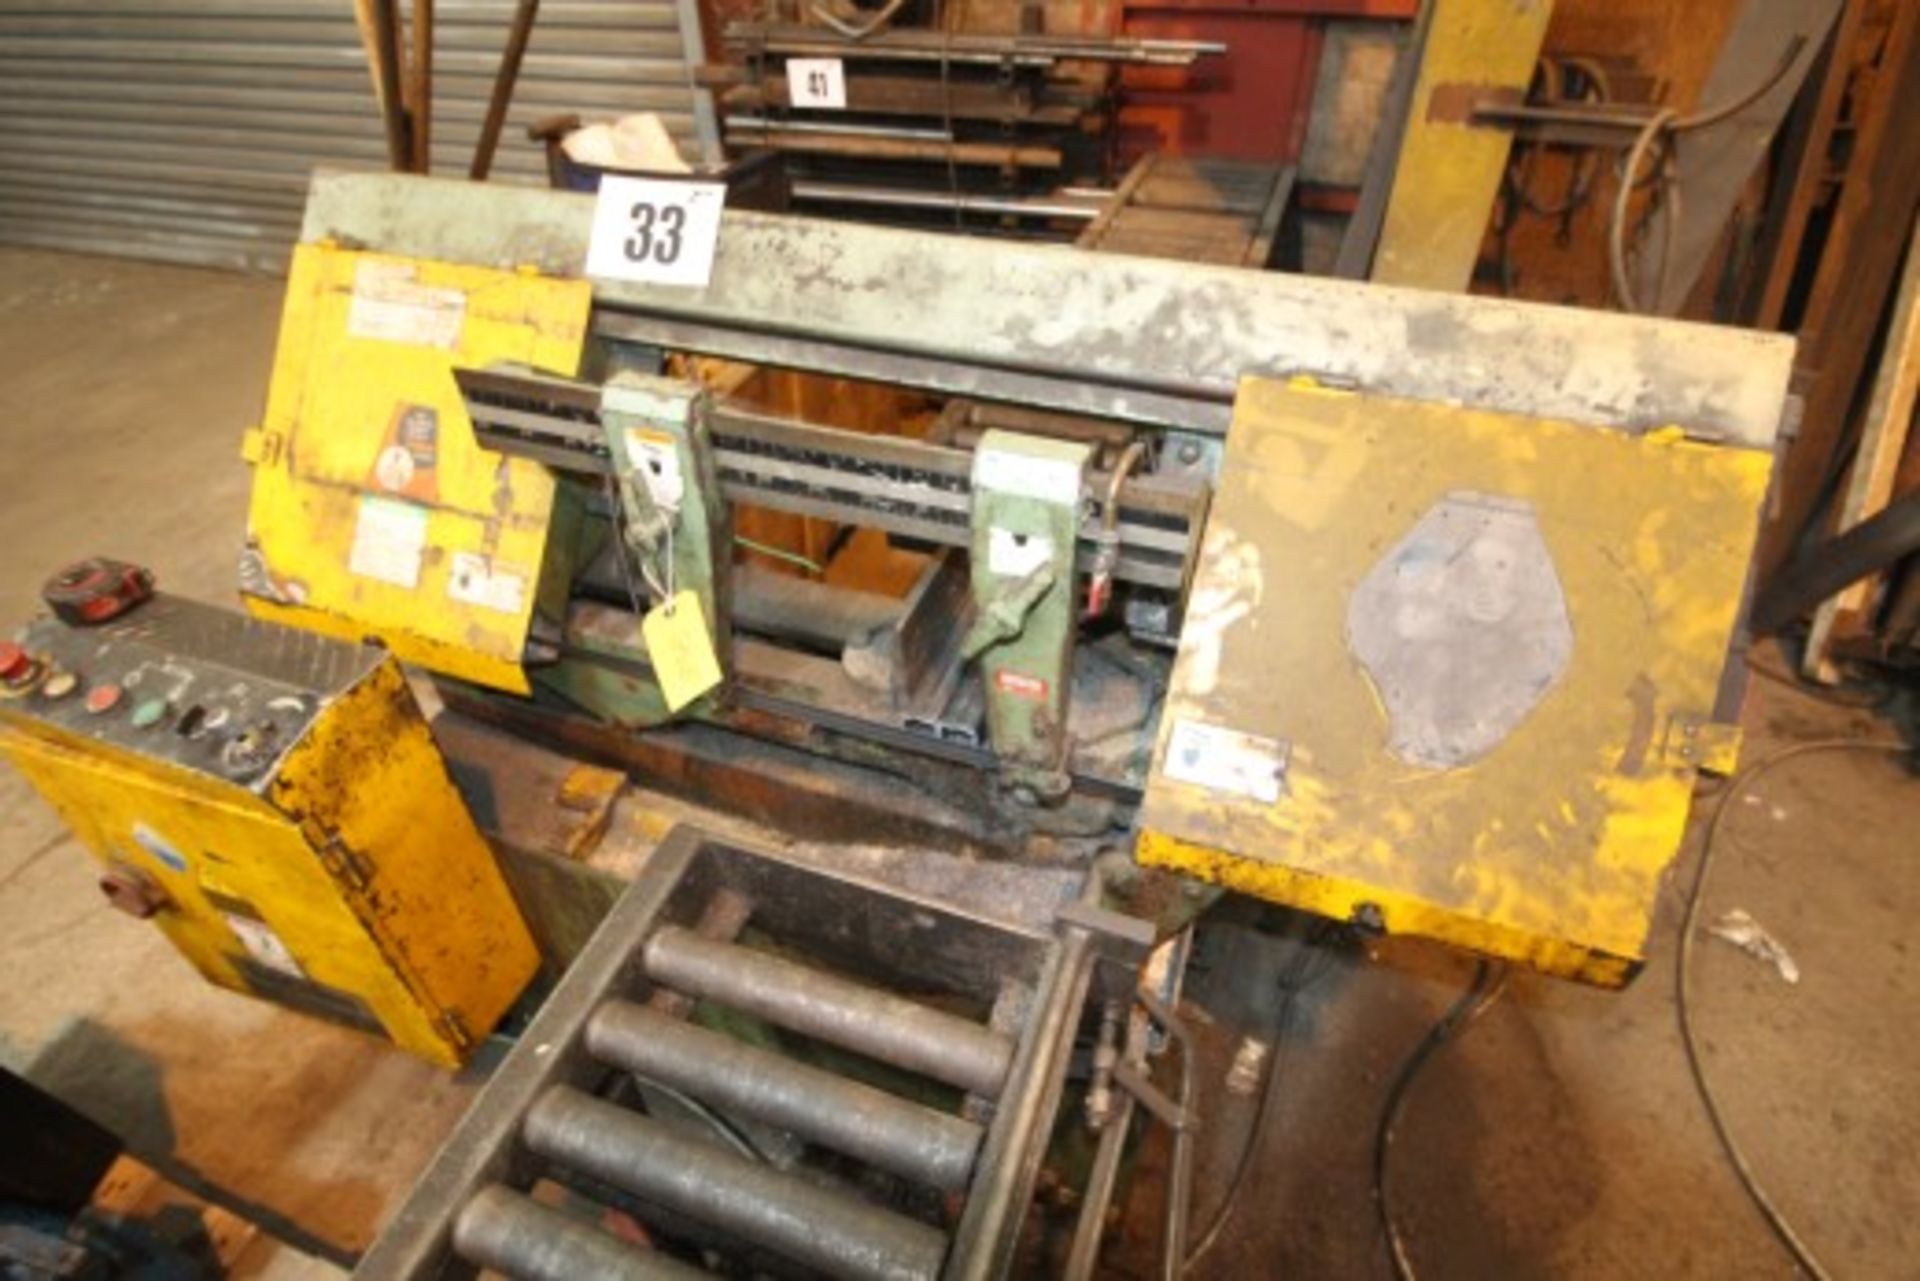 ADDISON SEMI AUTOMATIC BAND SAW COMPLETE WITH FEED-IN / FEED-OUT ROLLS, MODEL MH101611, 3-PHASE